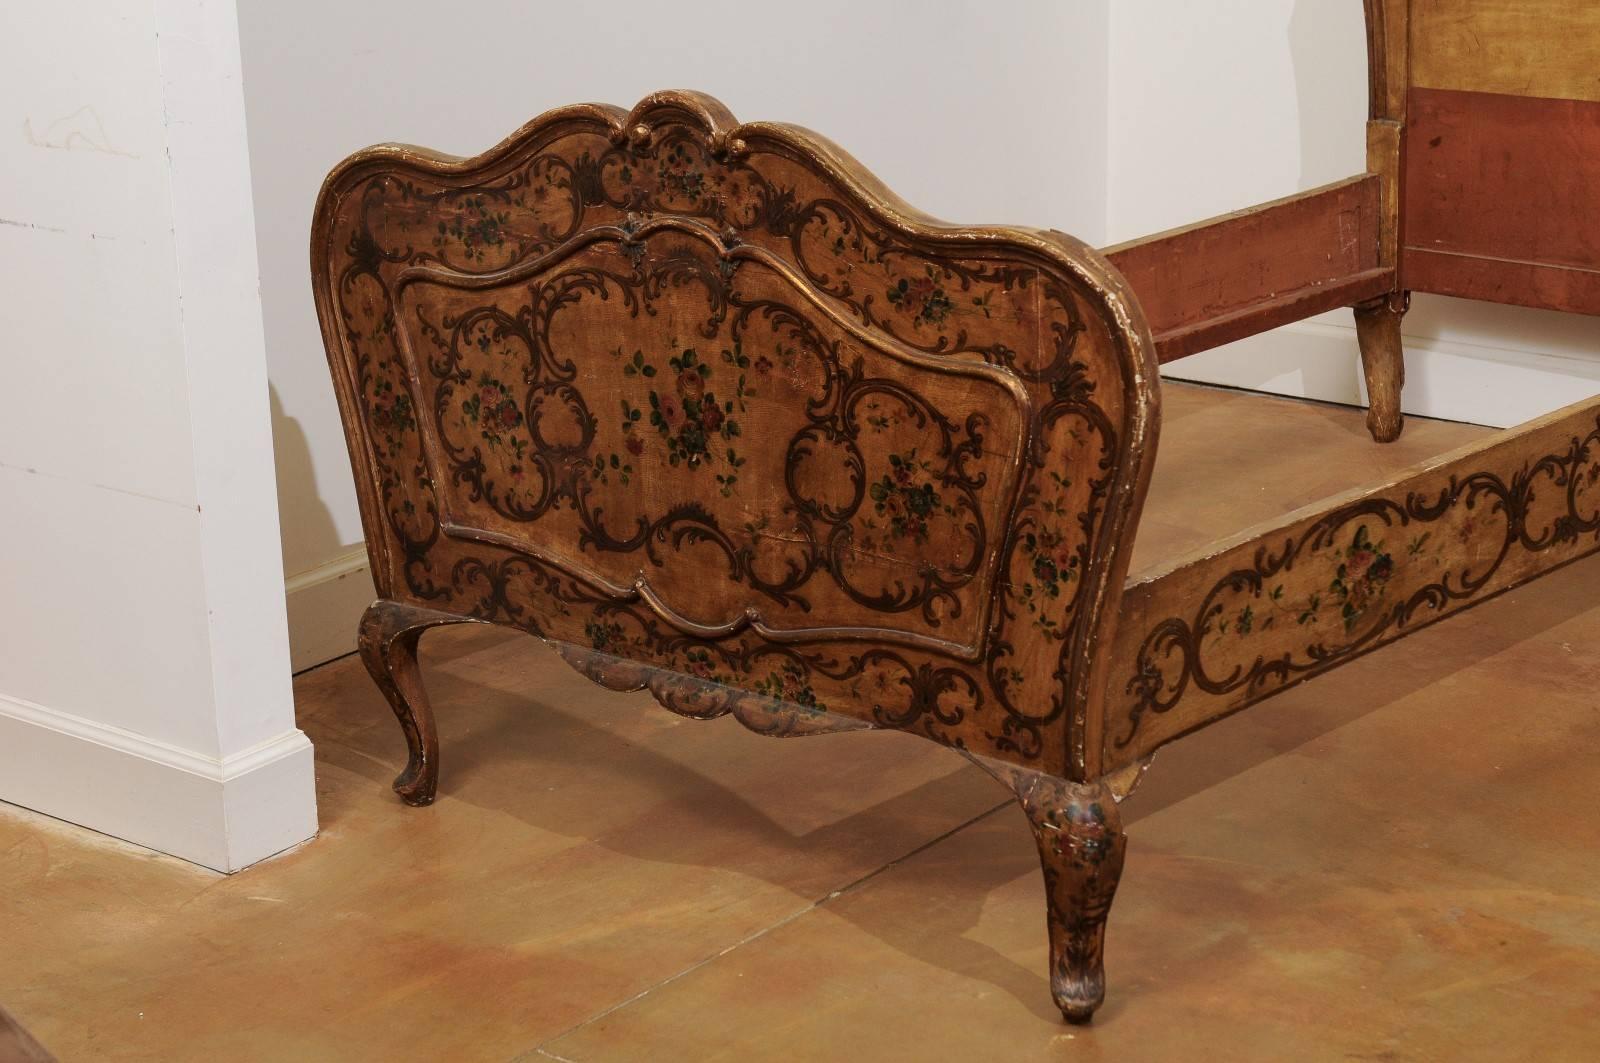 Painted Italian Rococo Style Early 19th Century Bed Frame with Floral and Bird Décor